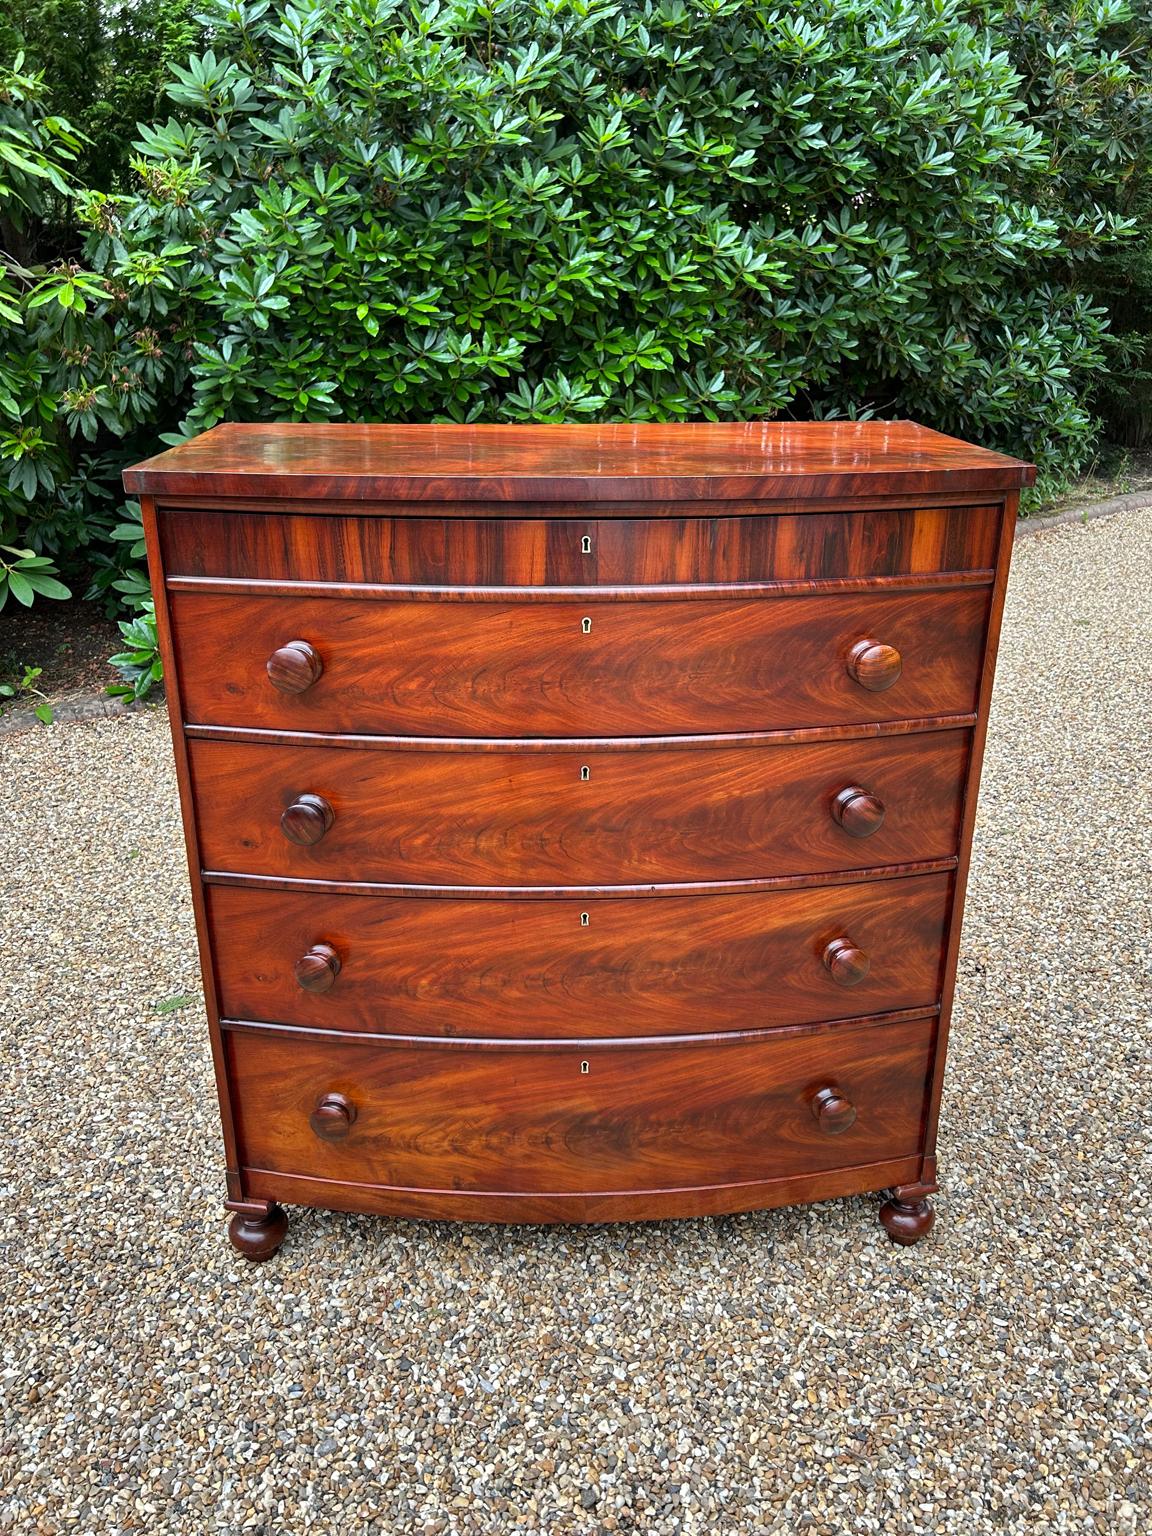 A 19th Century Victorian Mahogany Bow Fronted Chest of Drawers, with four long graduated drawers with turned bun handles raised upon turned feet.

Circa: 1860

Dimensions:
Height:  47.5 inches – 121 cms
Width:   43 inches – 110 cms
Depth:    23.5